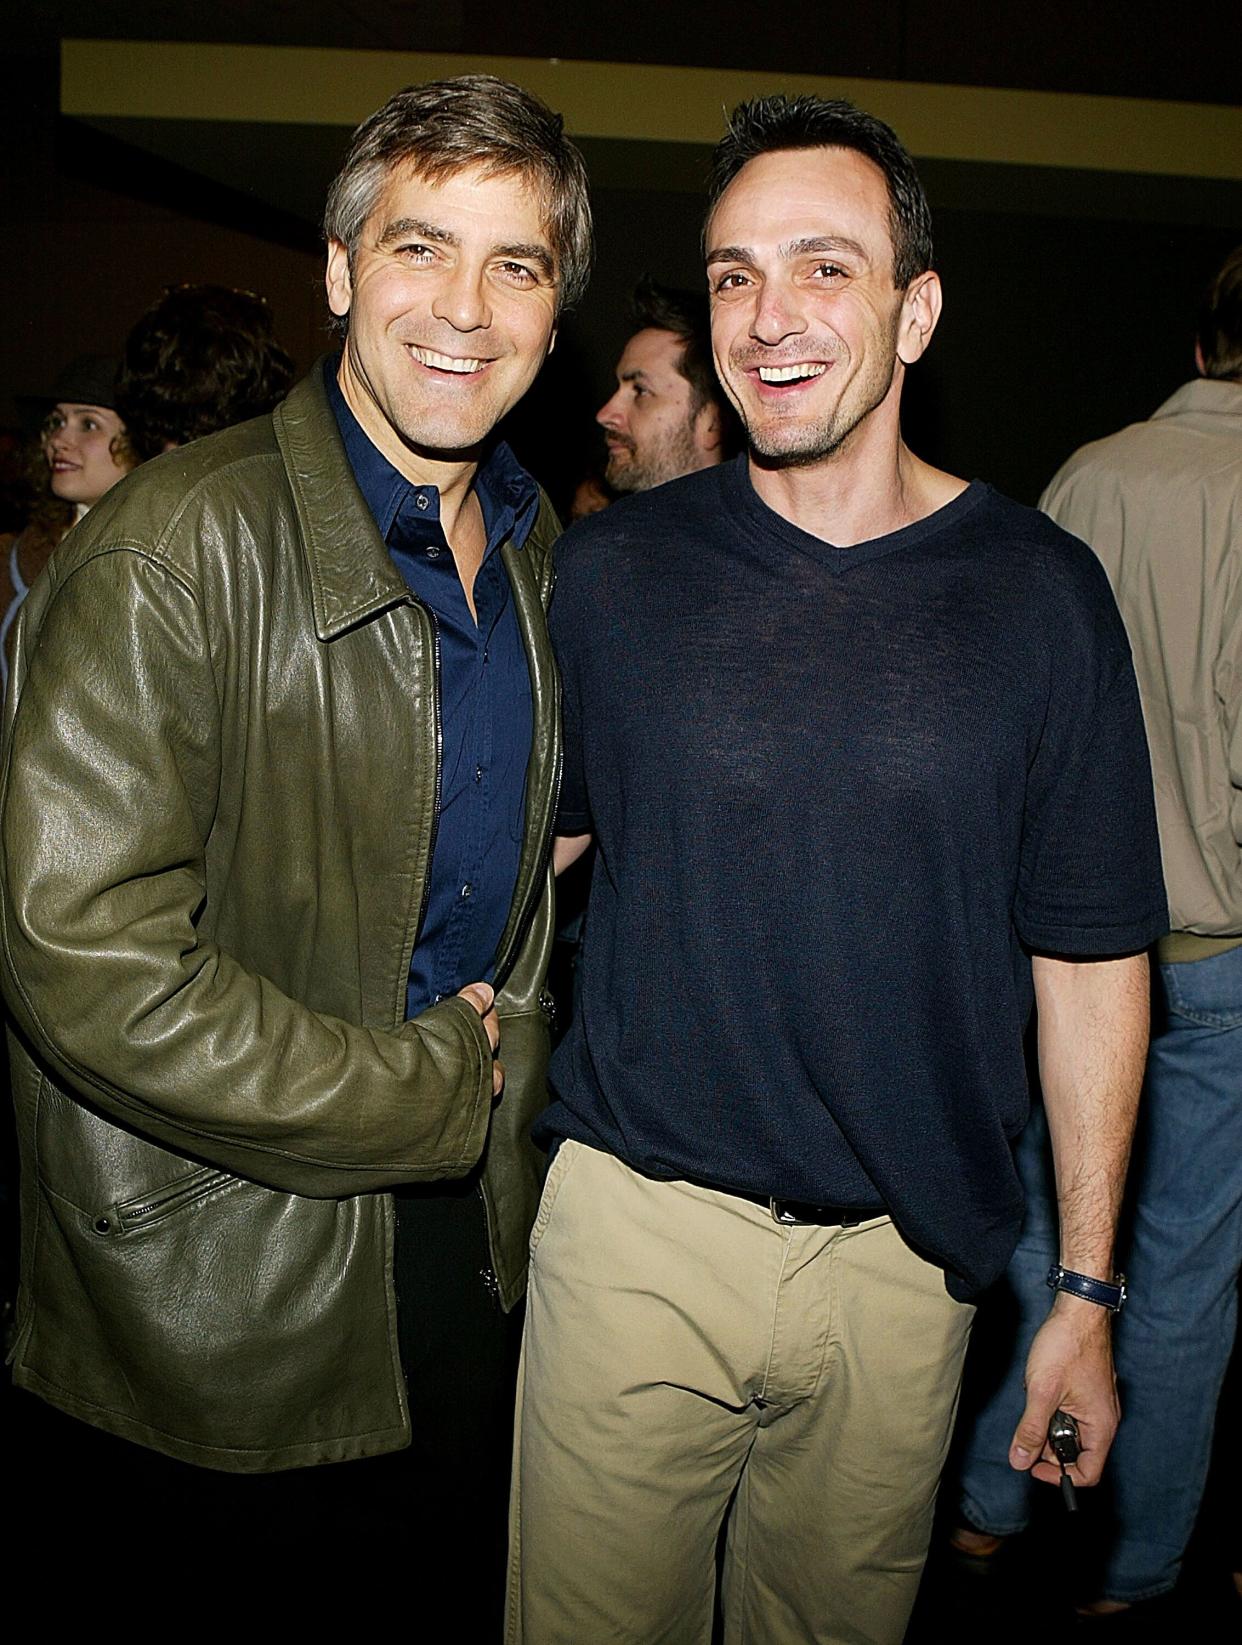 Clooney and Hank Azaria at an event for the short film "Nobody's Perfect" in Los Angeles.